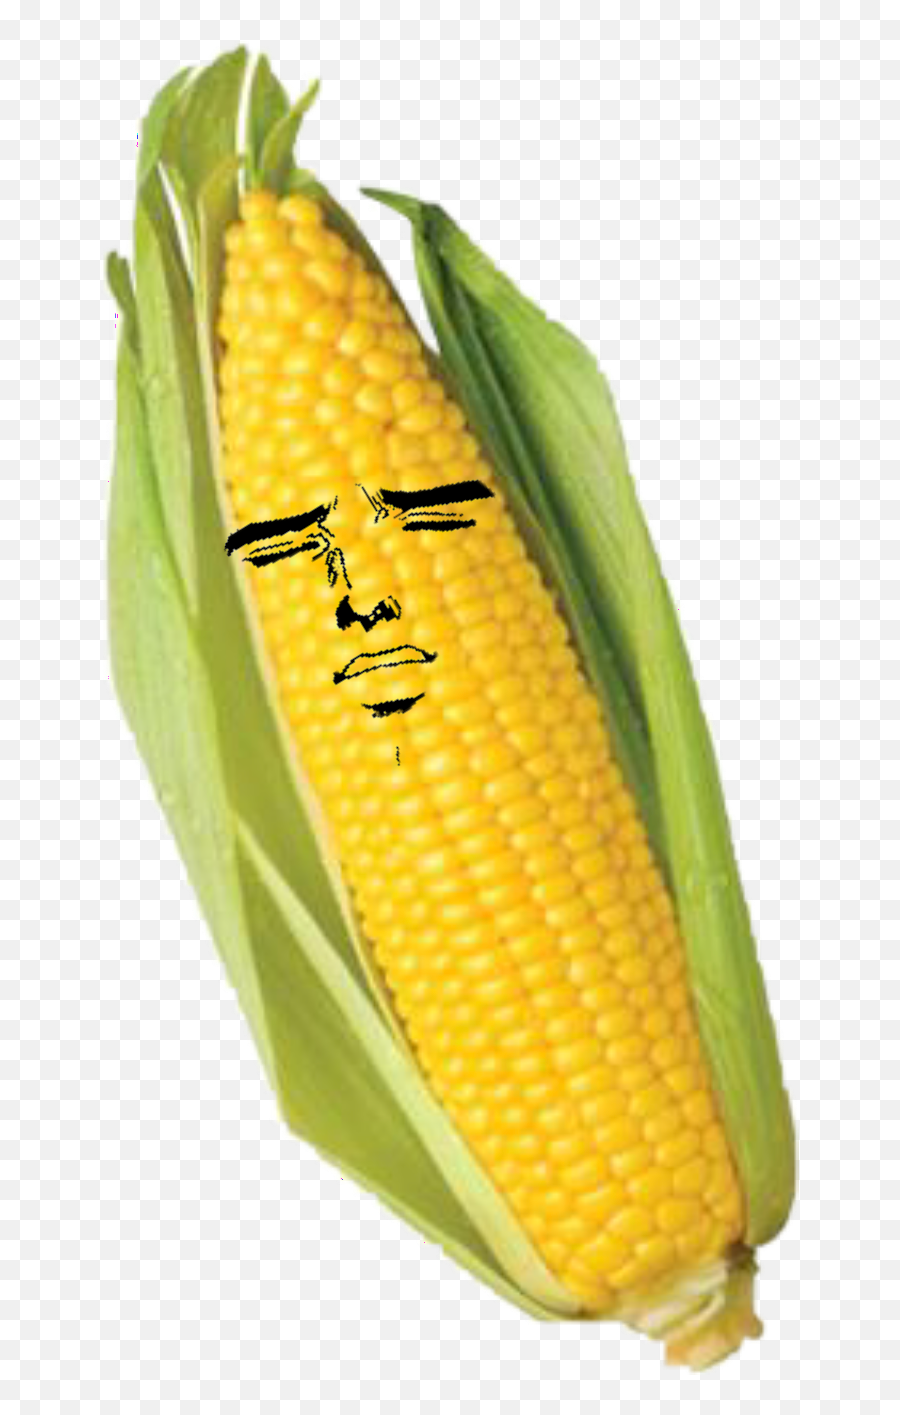 AI Art Generator: Anime boy with cat ears eating buttery corn on the cob  romantically